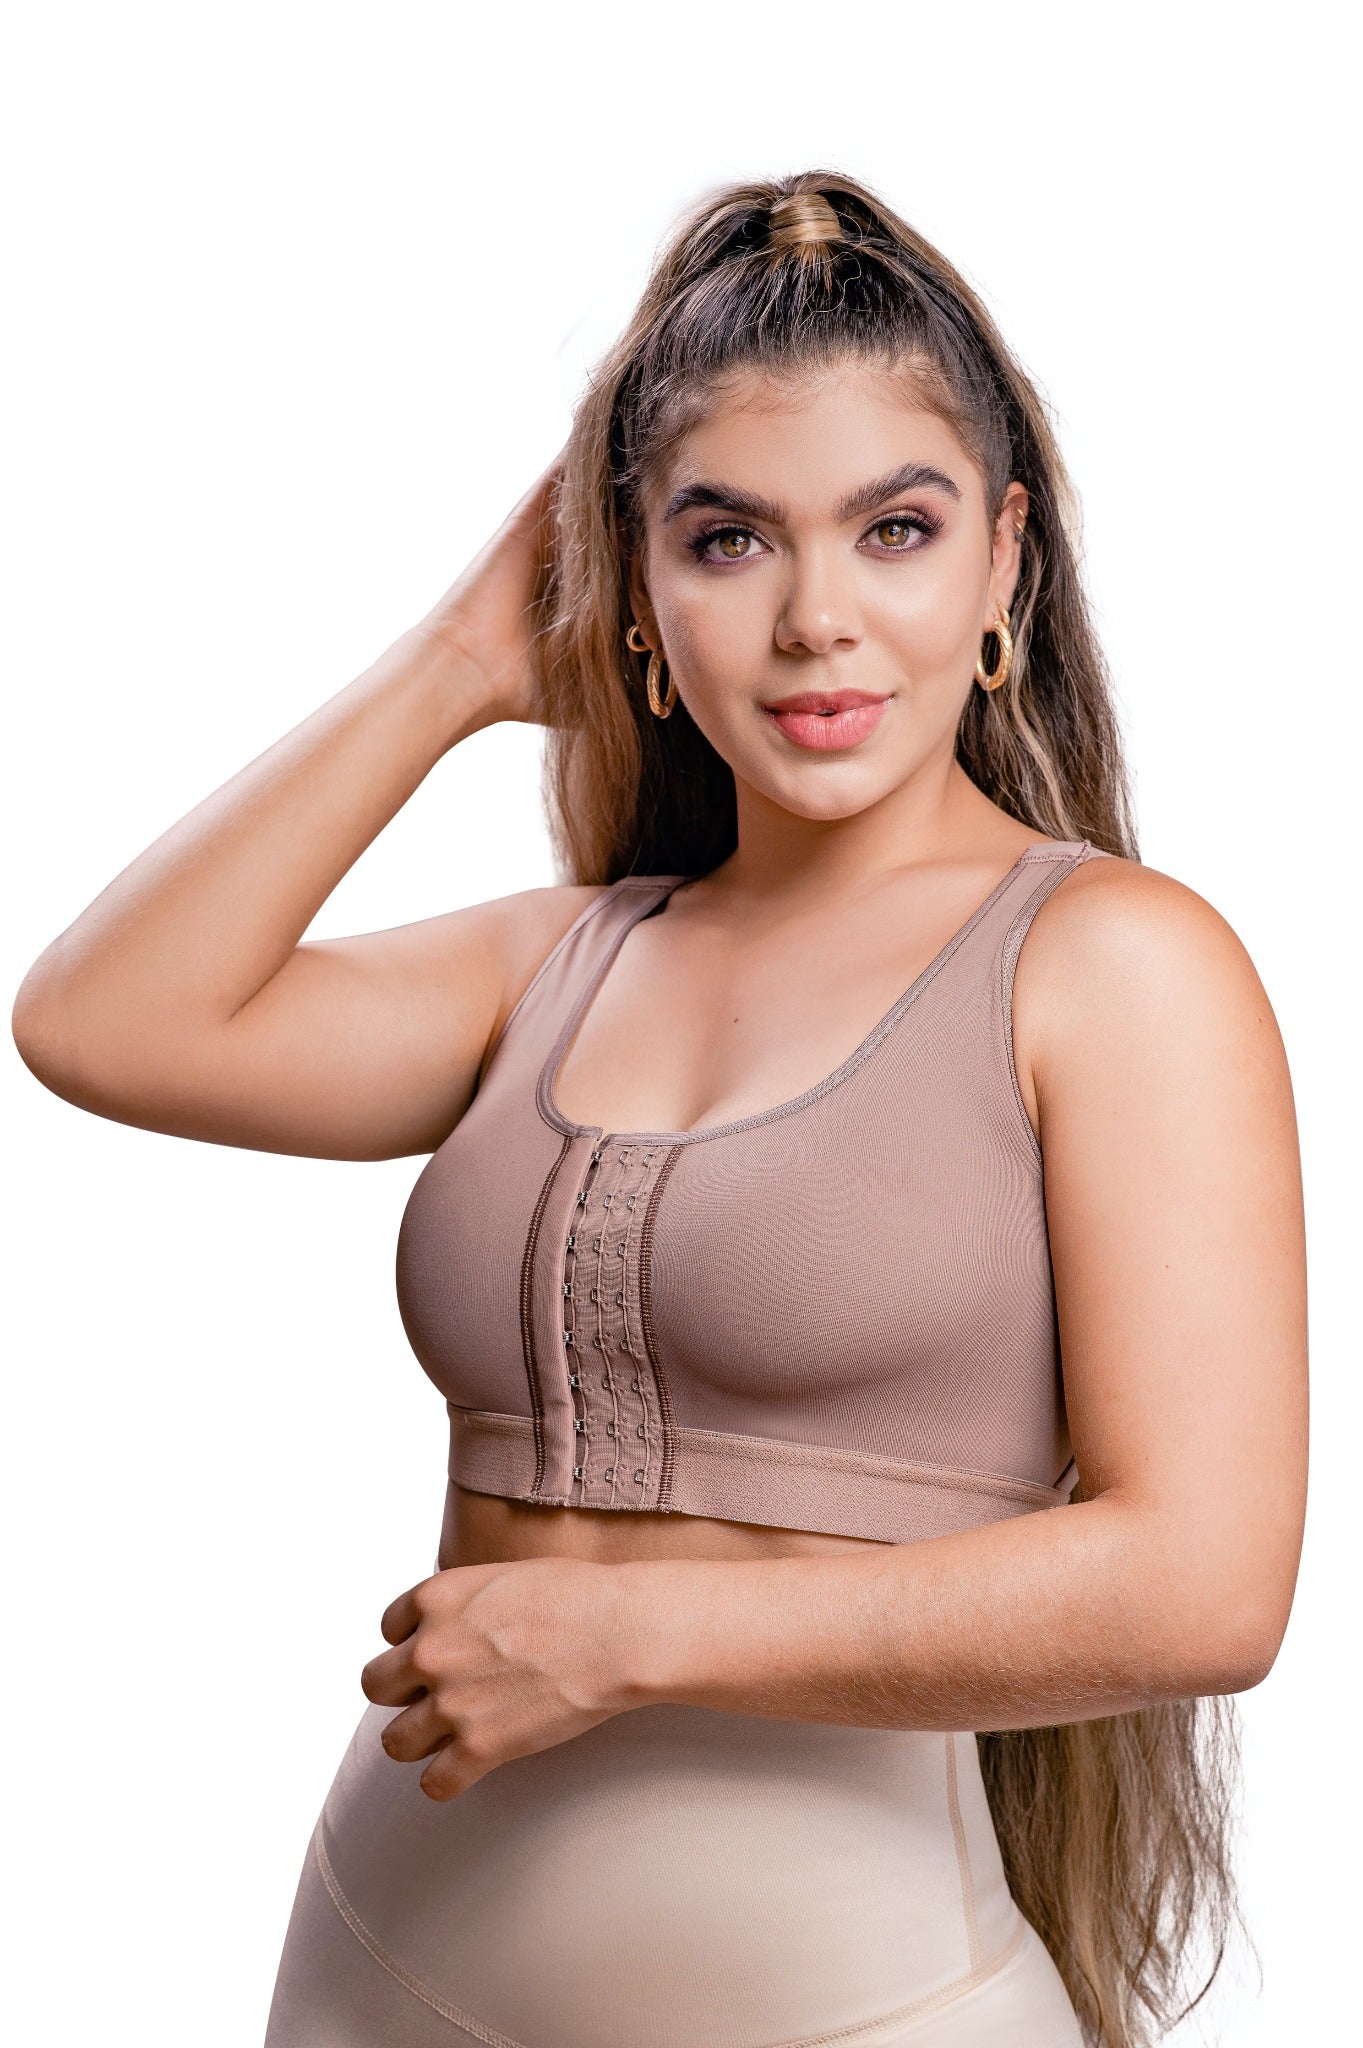 Post Surgical Compression Bra with Front hook-and-eye closure